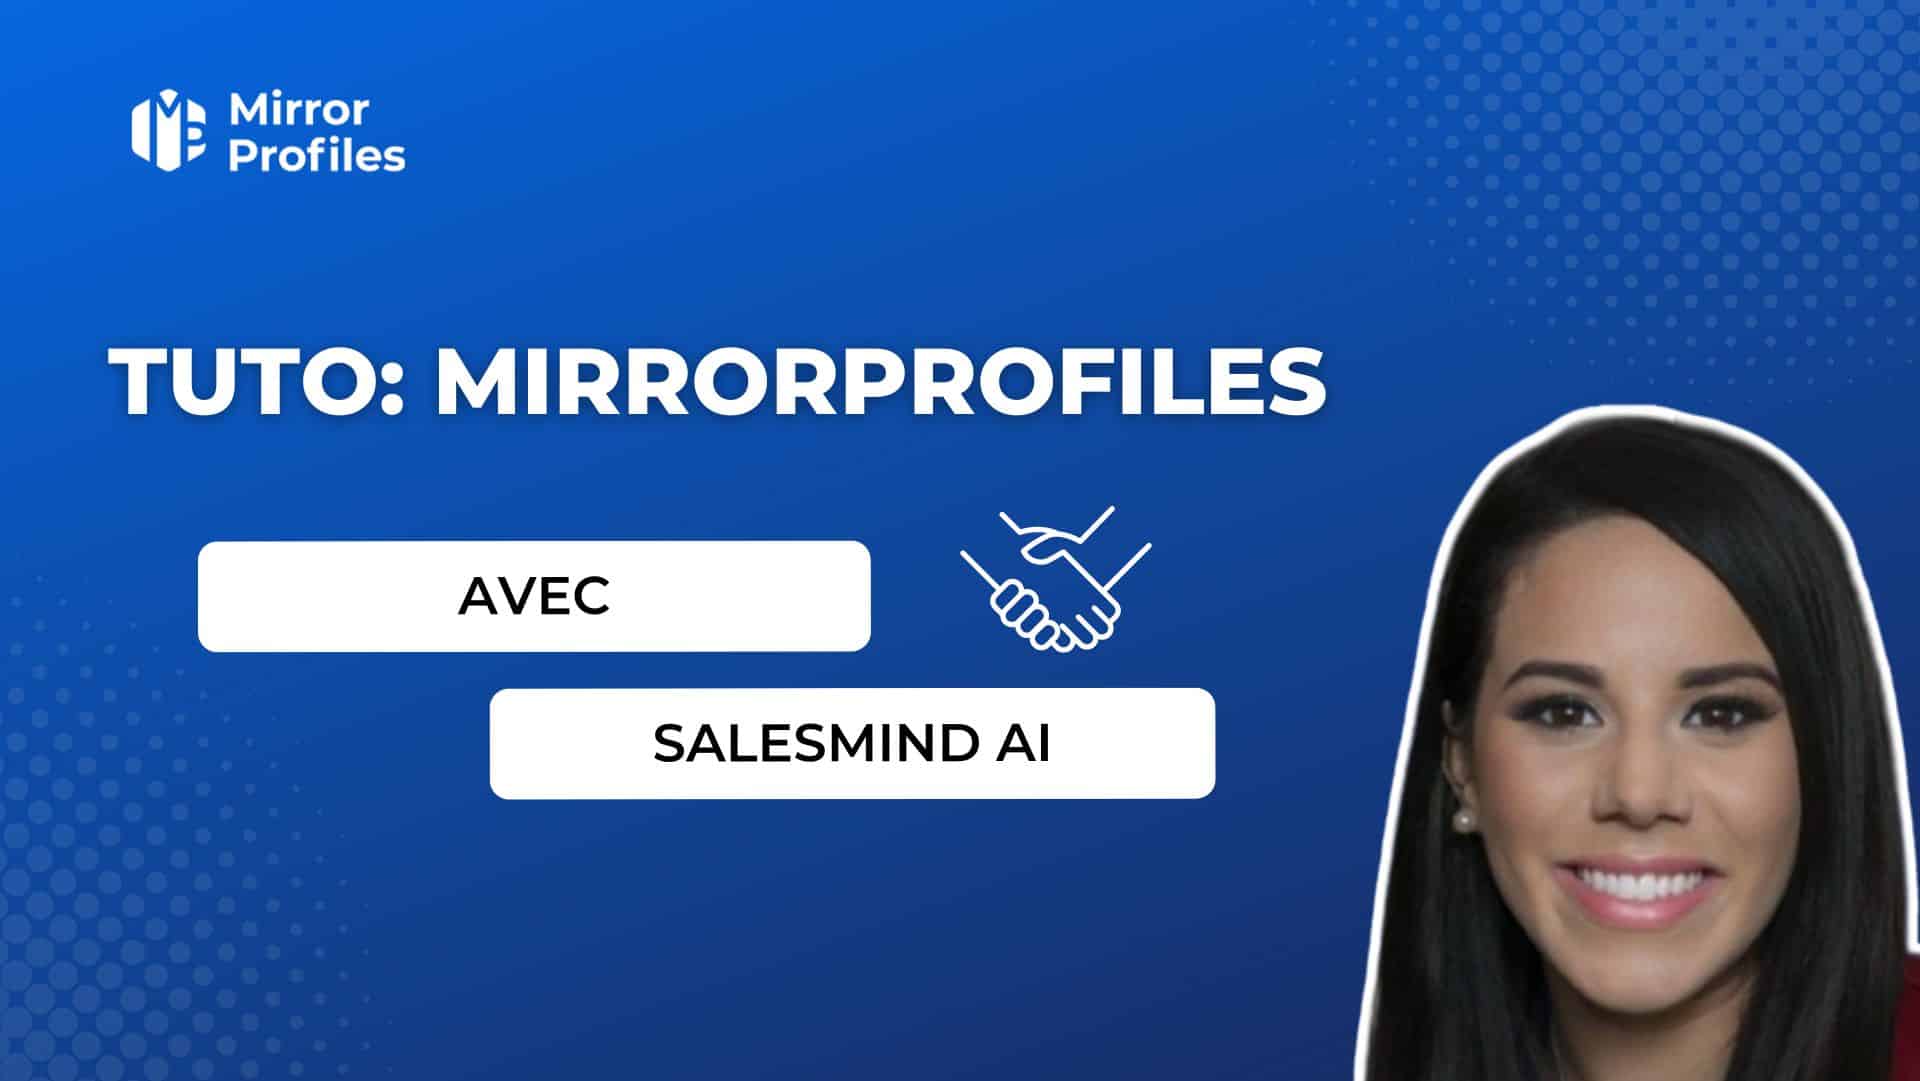 A promotional image with the text "Tutorial: MirrorProfiles avec SalesMind AI" featuring a woman's photo. The background is blue with the MirrorProfiles logo in the top left corner.